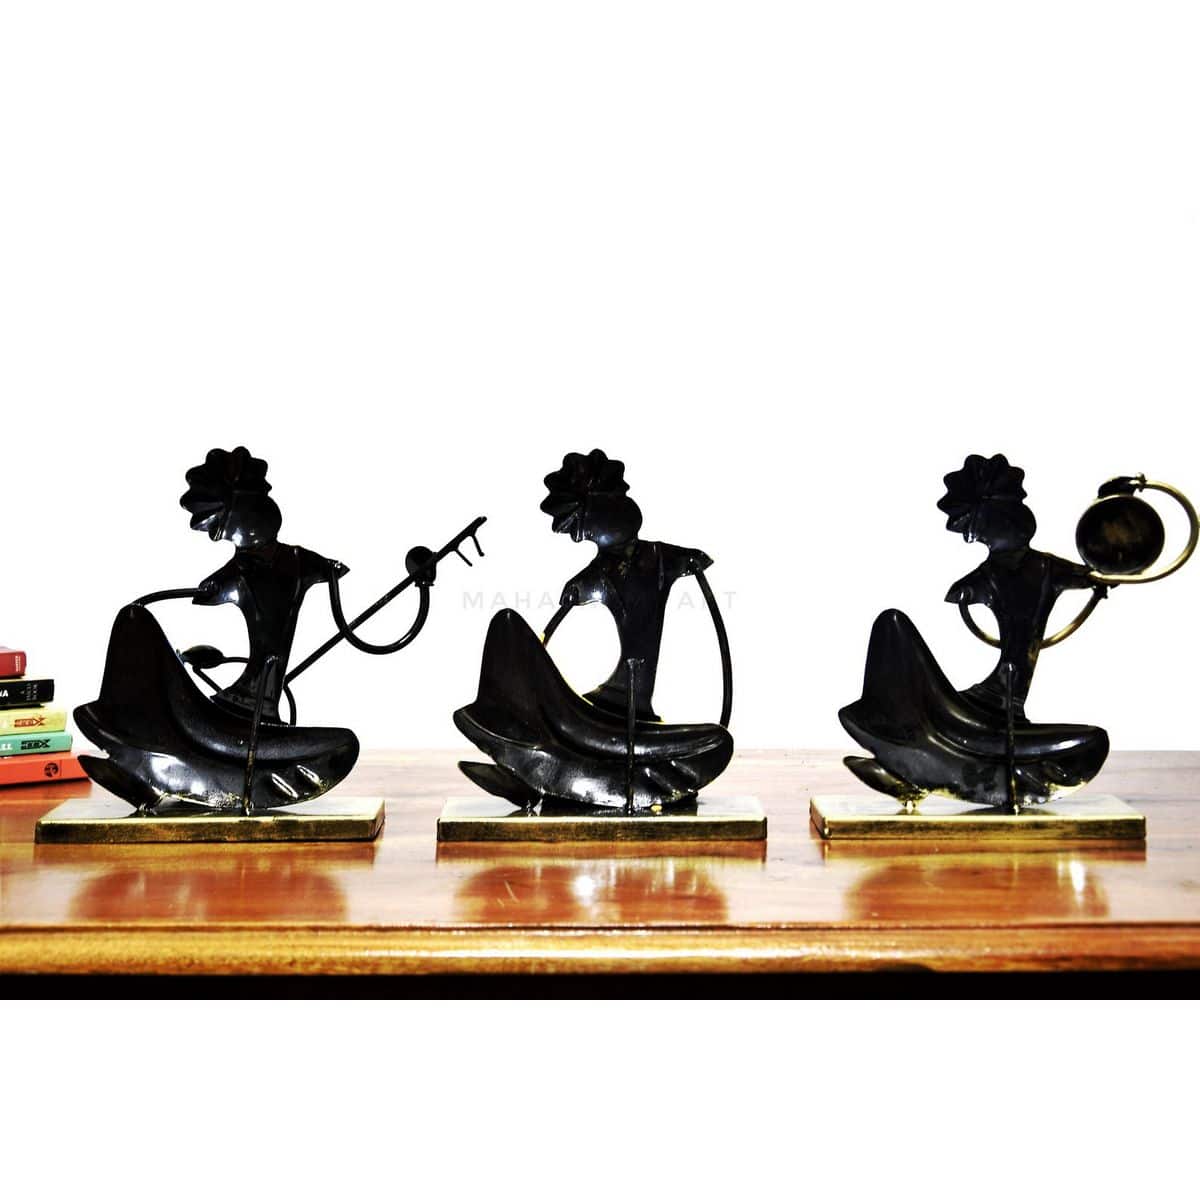 Set of 3 Musical Men Statue for Table Top Decor  